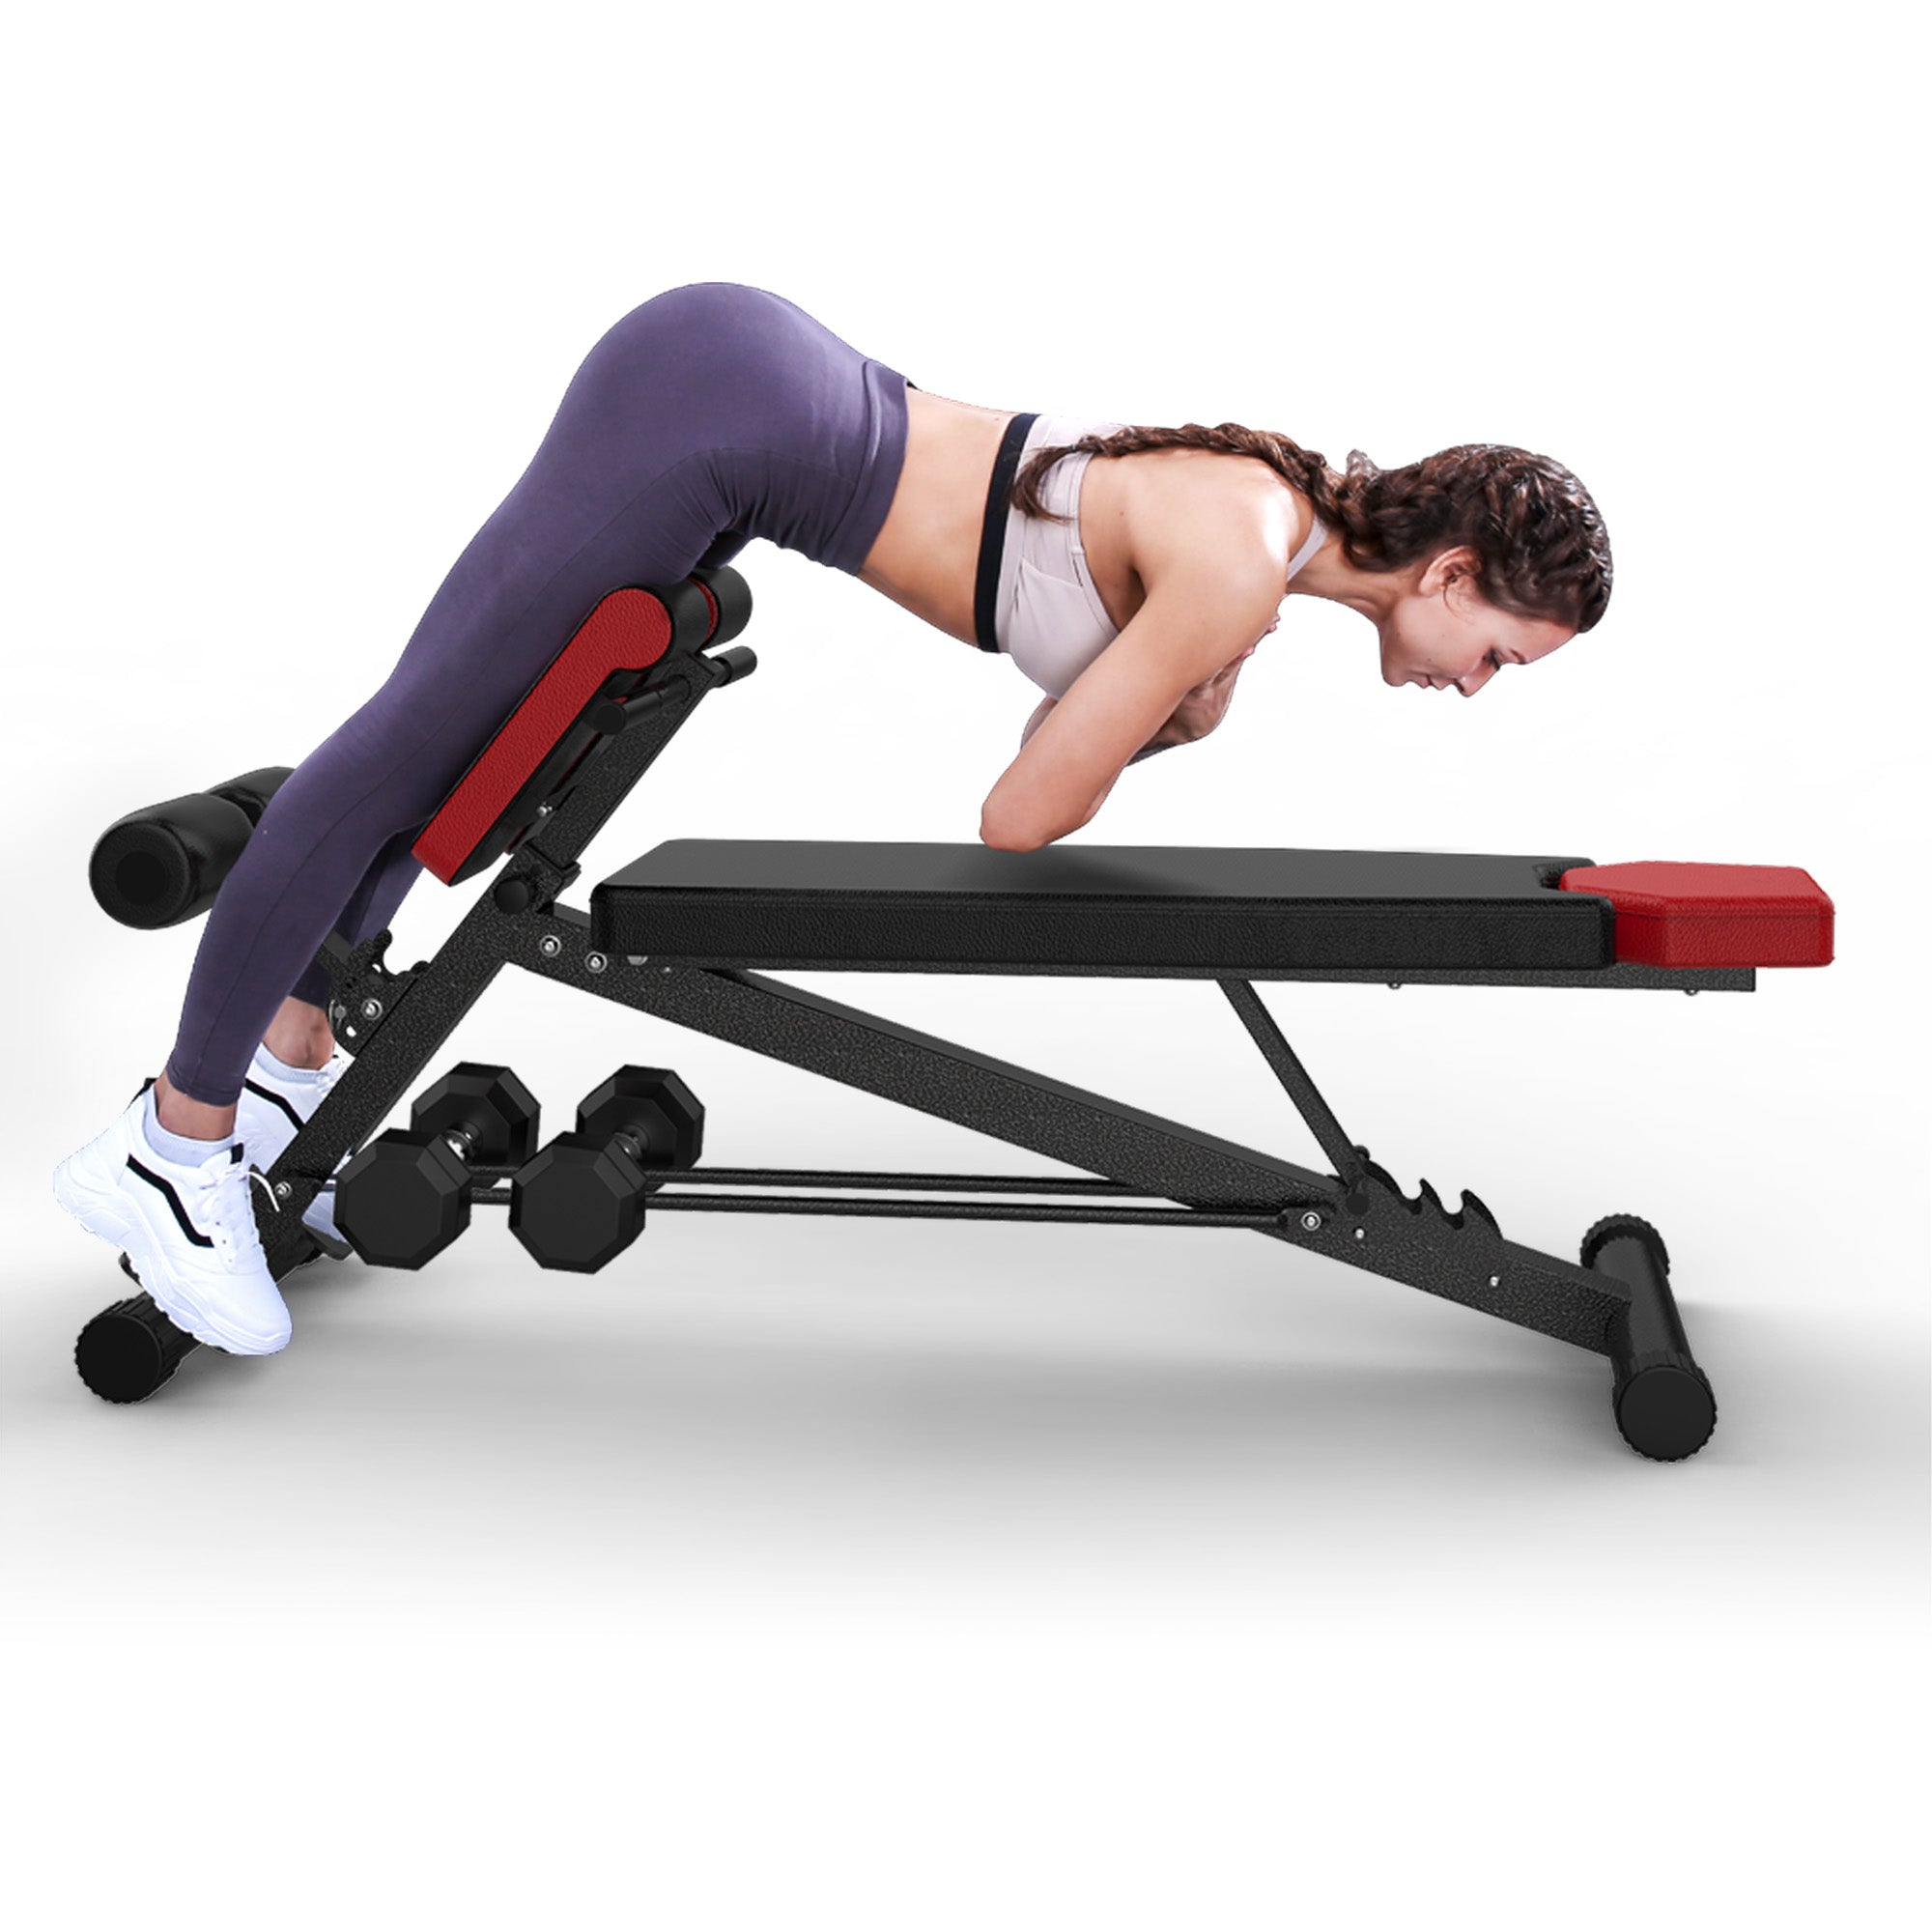 Finer Form Multi-Functional Gym Bench for Full All-in-One Body Workout